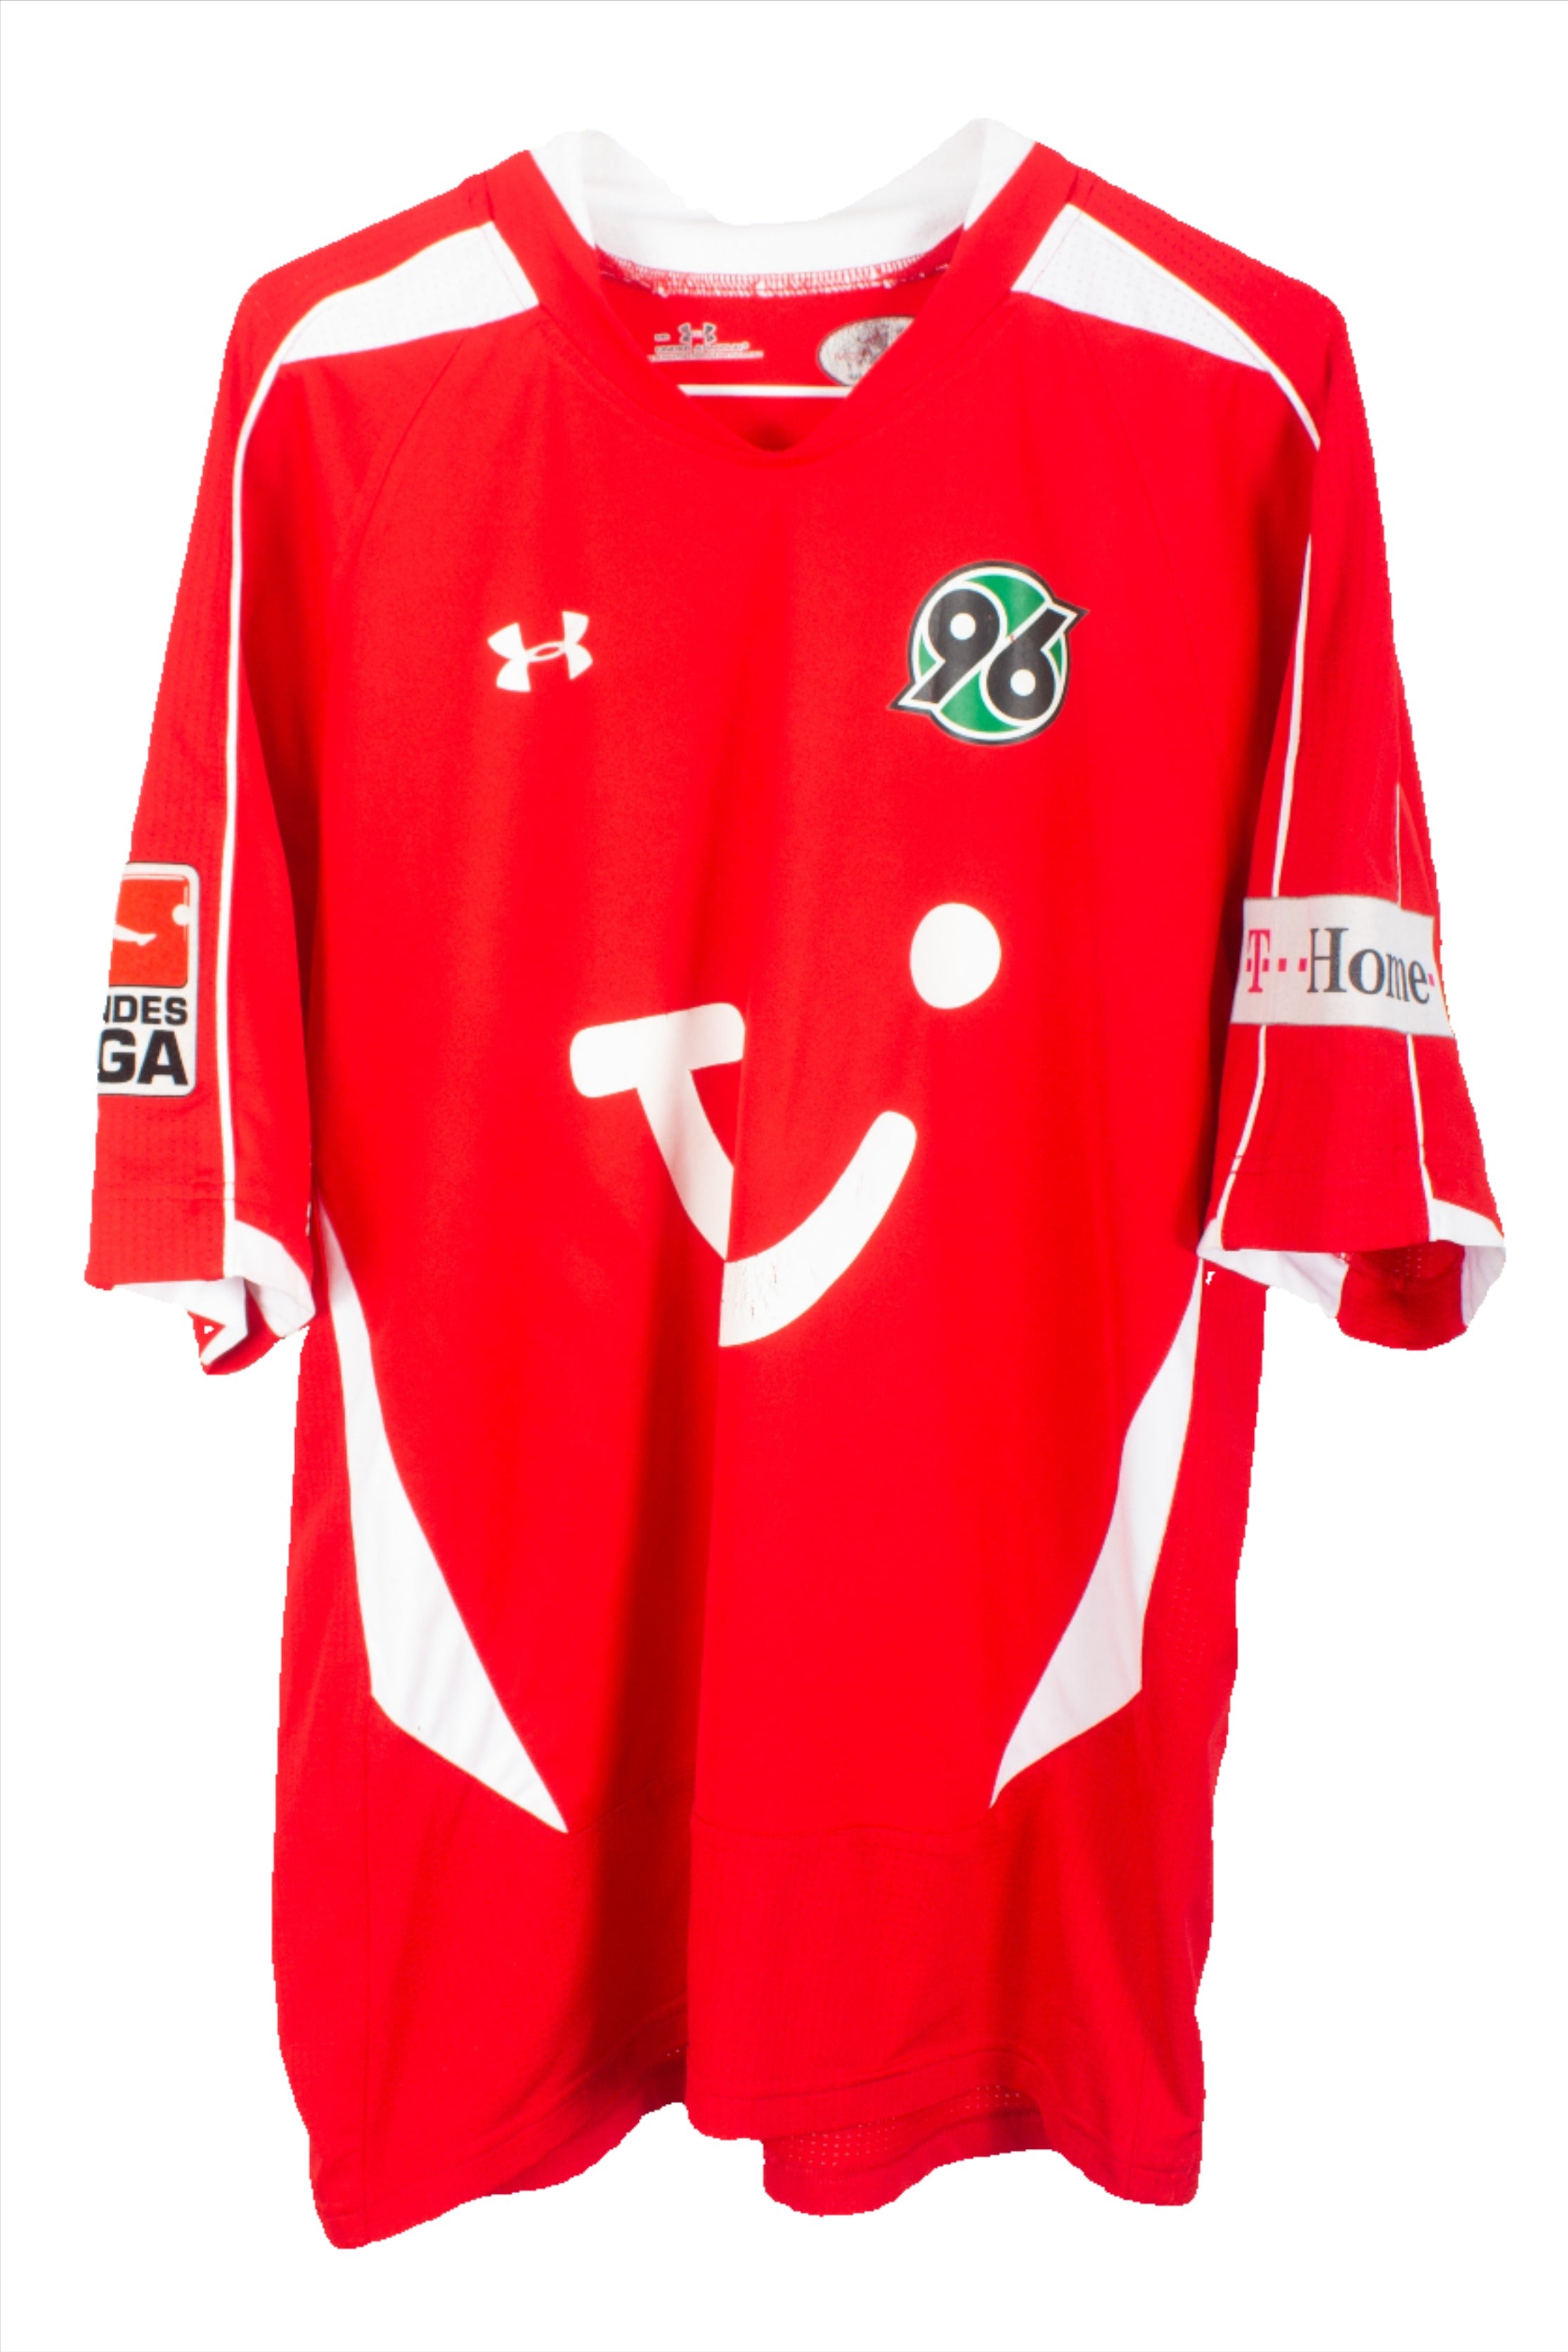 Hannover 96 2008/09 Home Shirt (Schuuulz #19)(M)